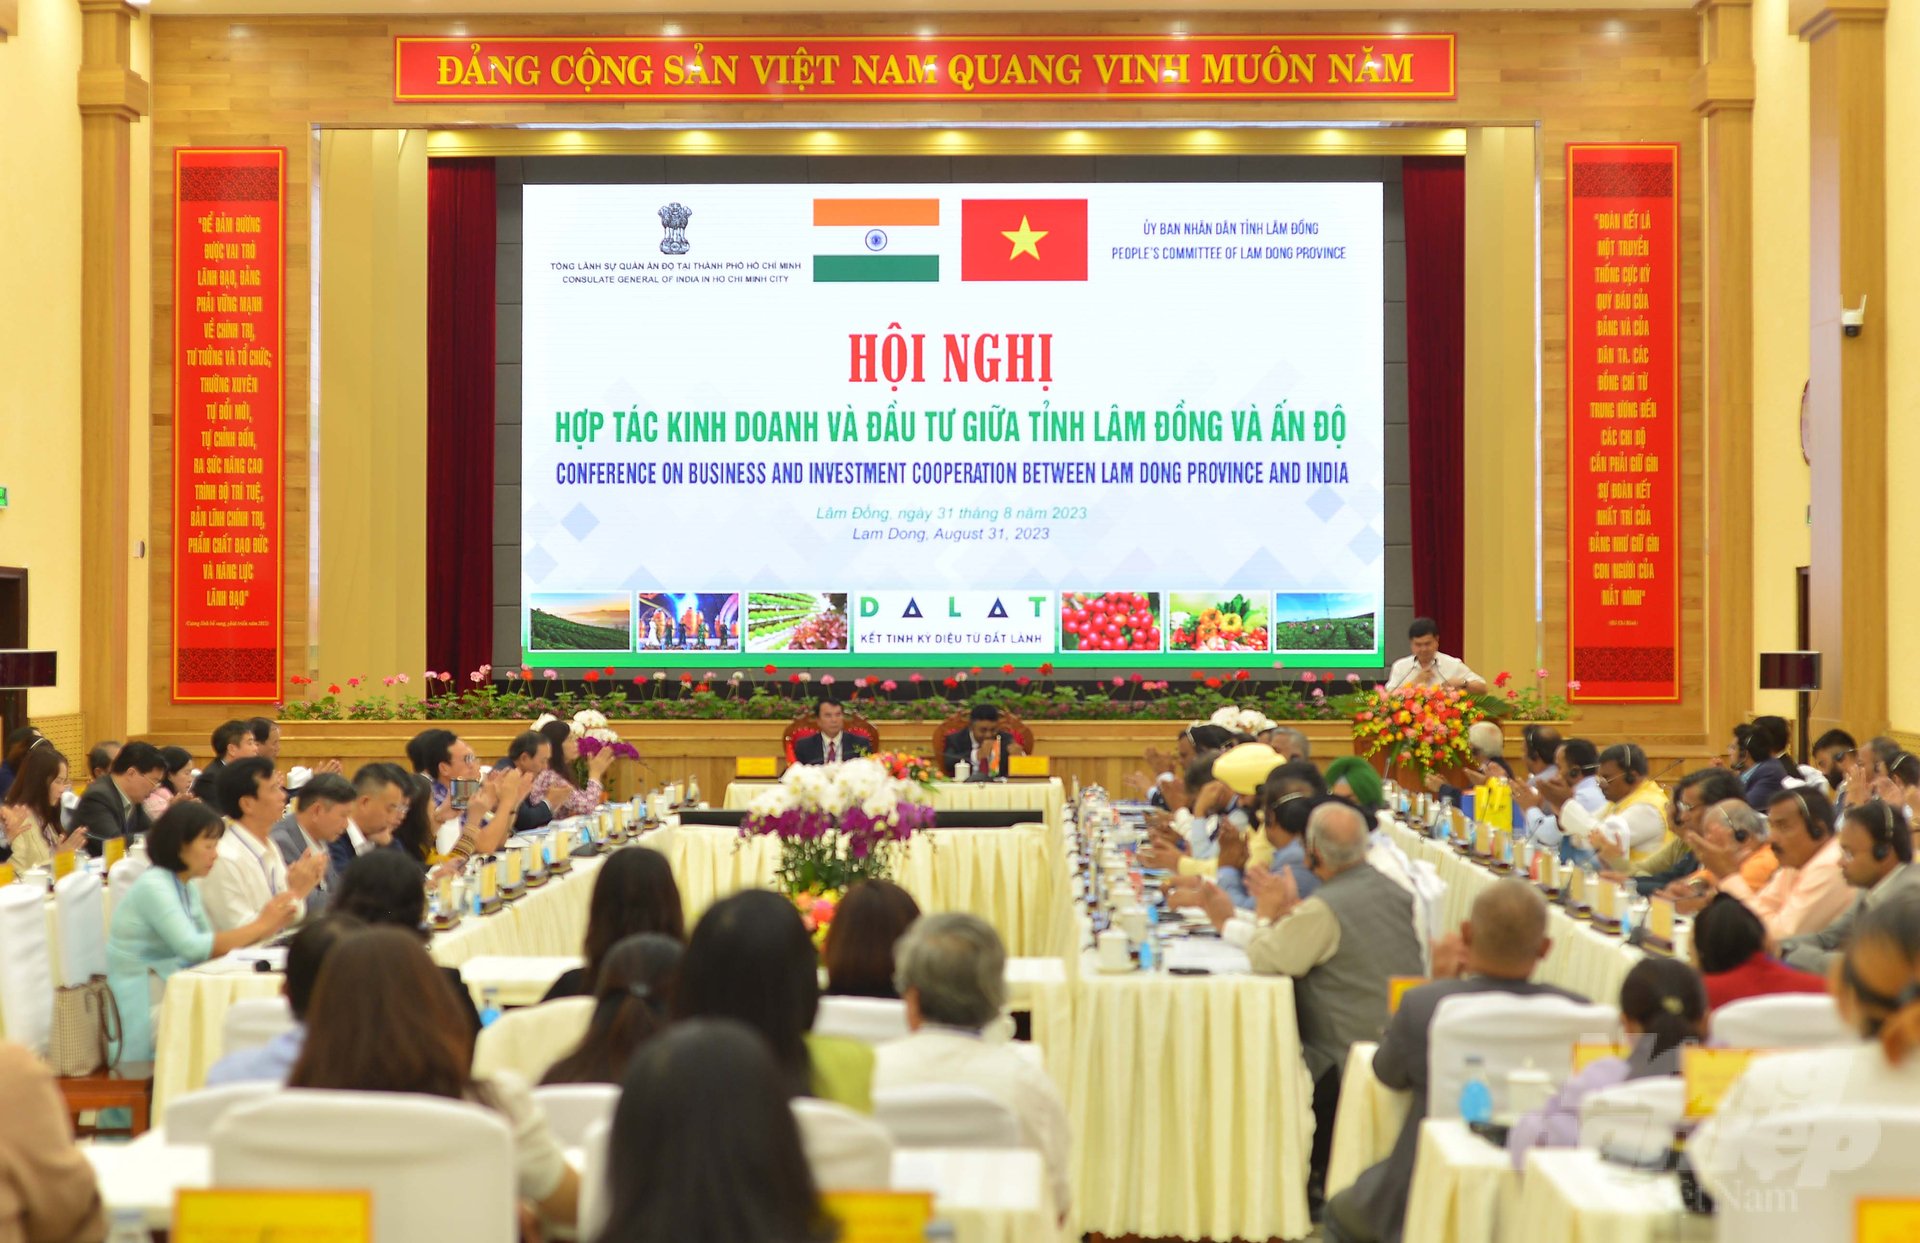 The Lam Dong - India Business and Investment Cooperation Conference was held in Da Lat City (Lam Dong) on the afternoon of August 31. Photo: Minh Hau.